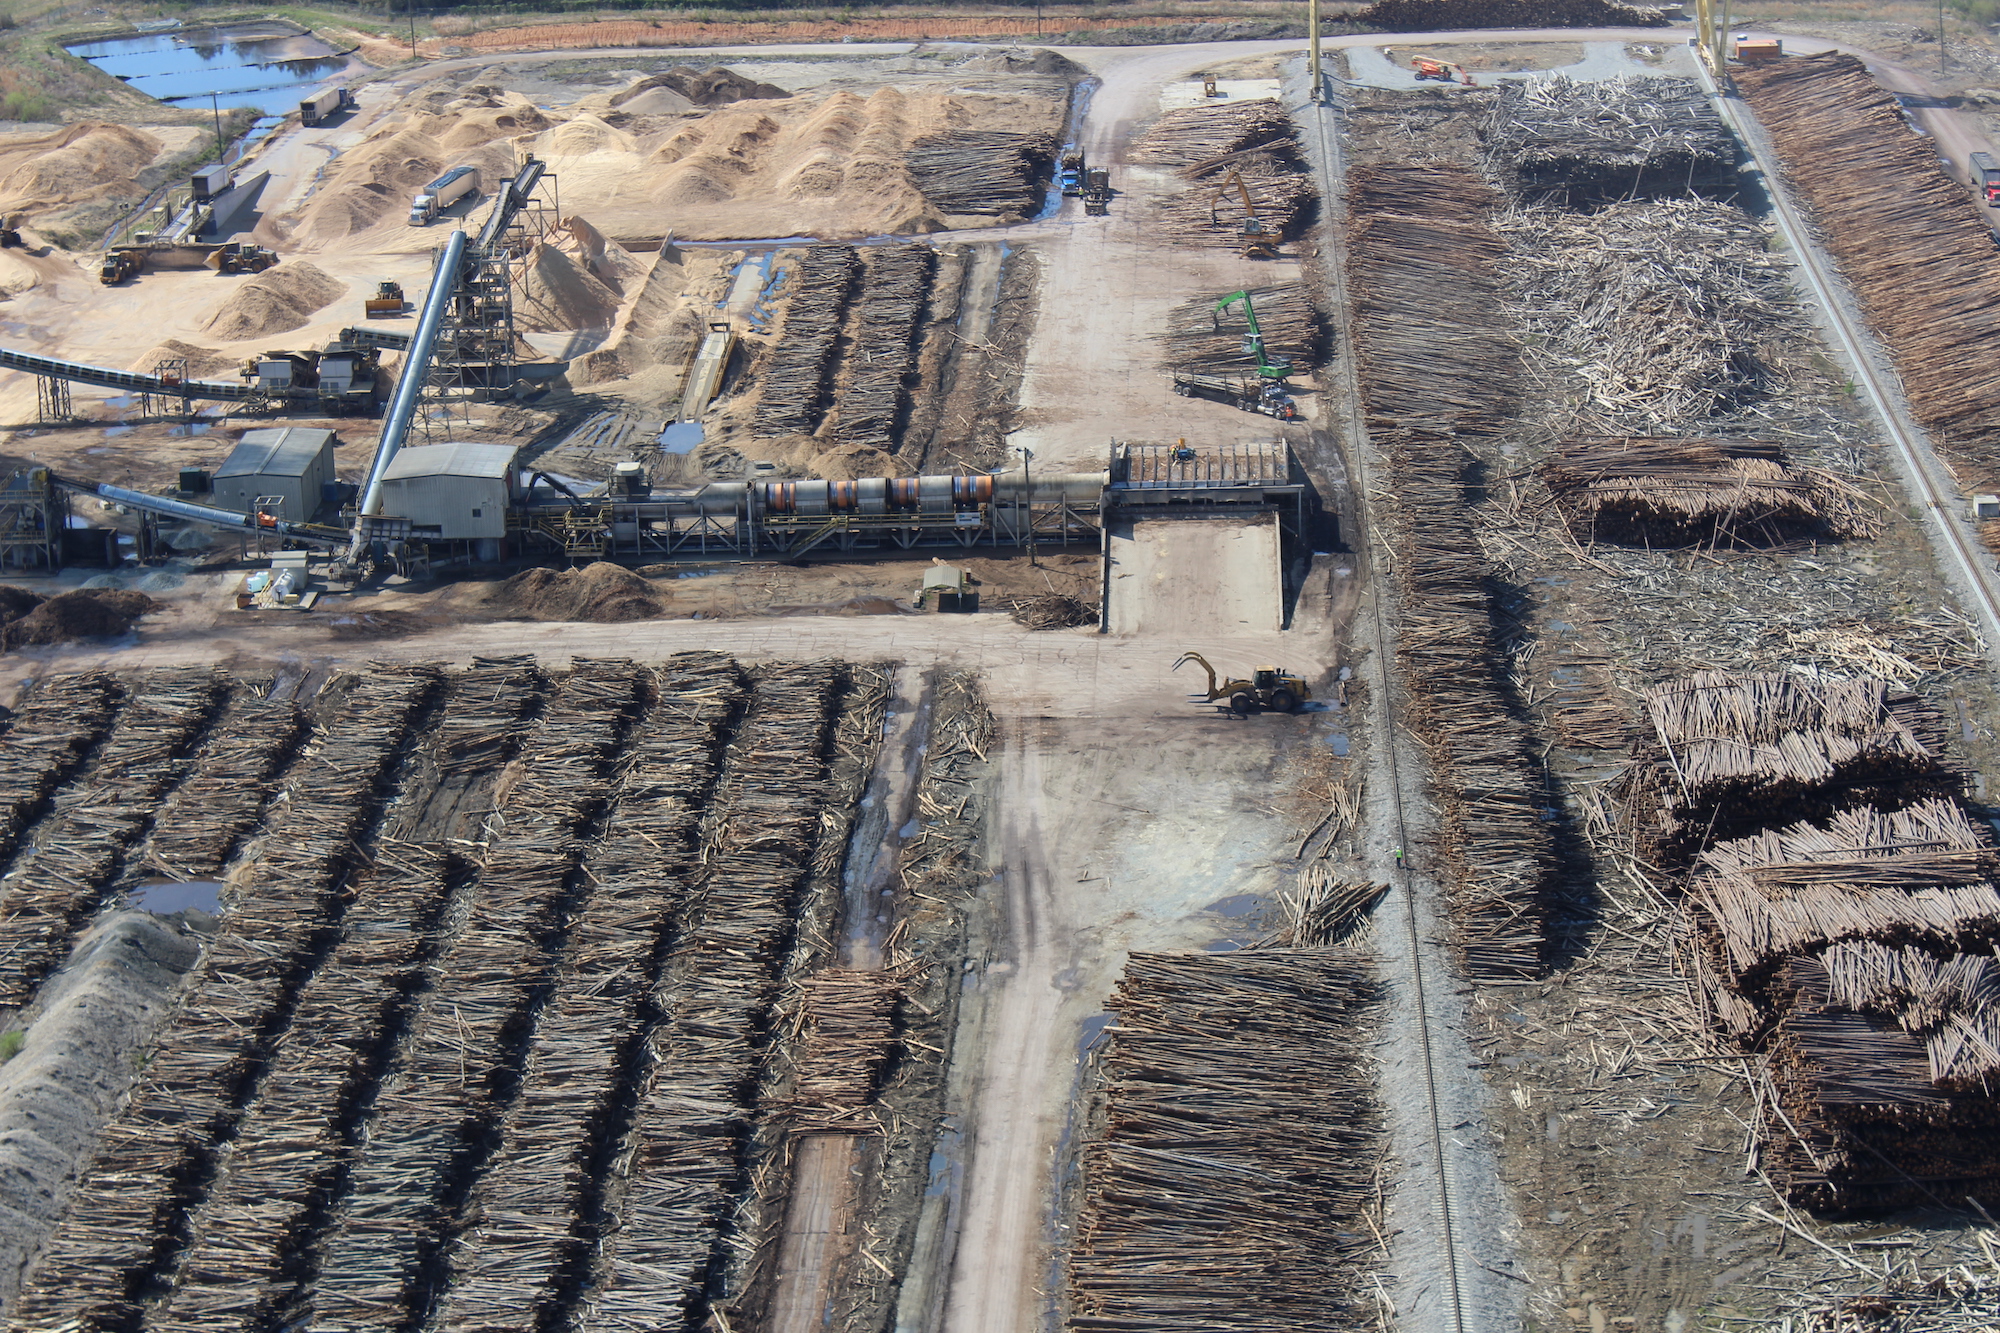 Piles of trees and wood residuals stacked in preparation for wood pellet production at Enviva's Northampton County facility. (Dogwood Alliance)